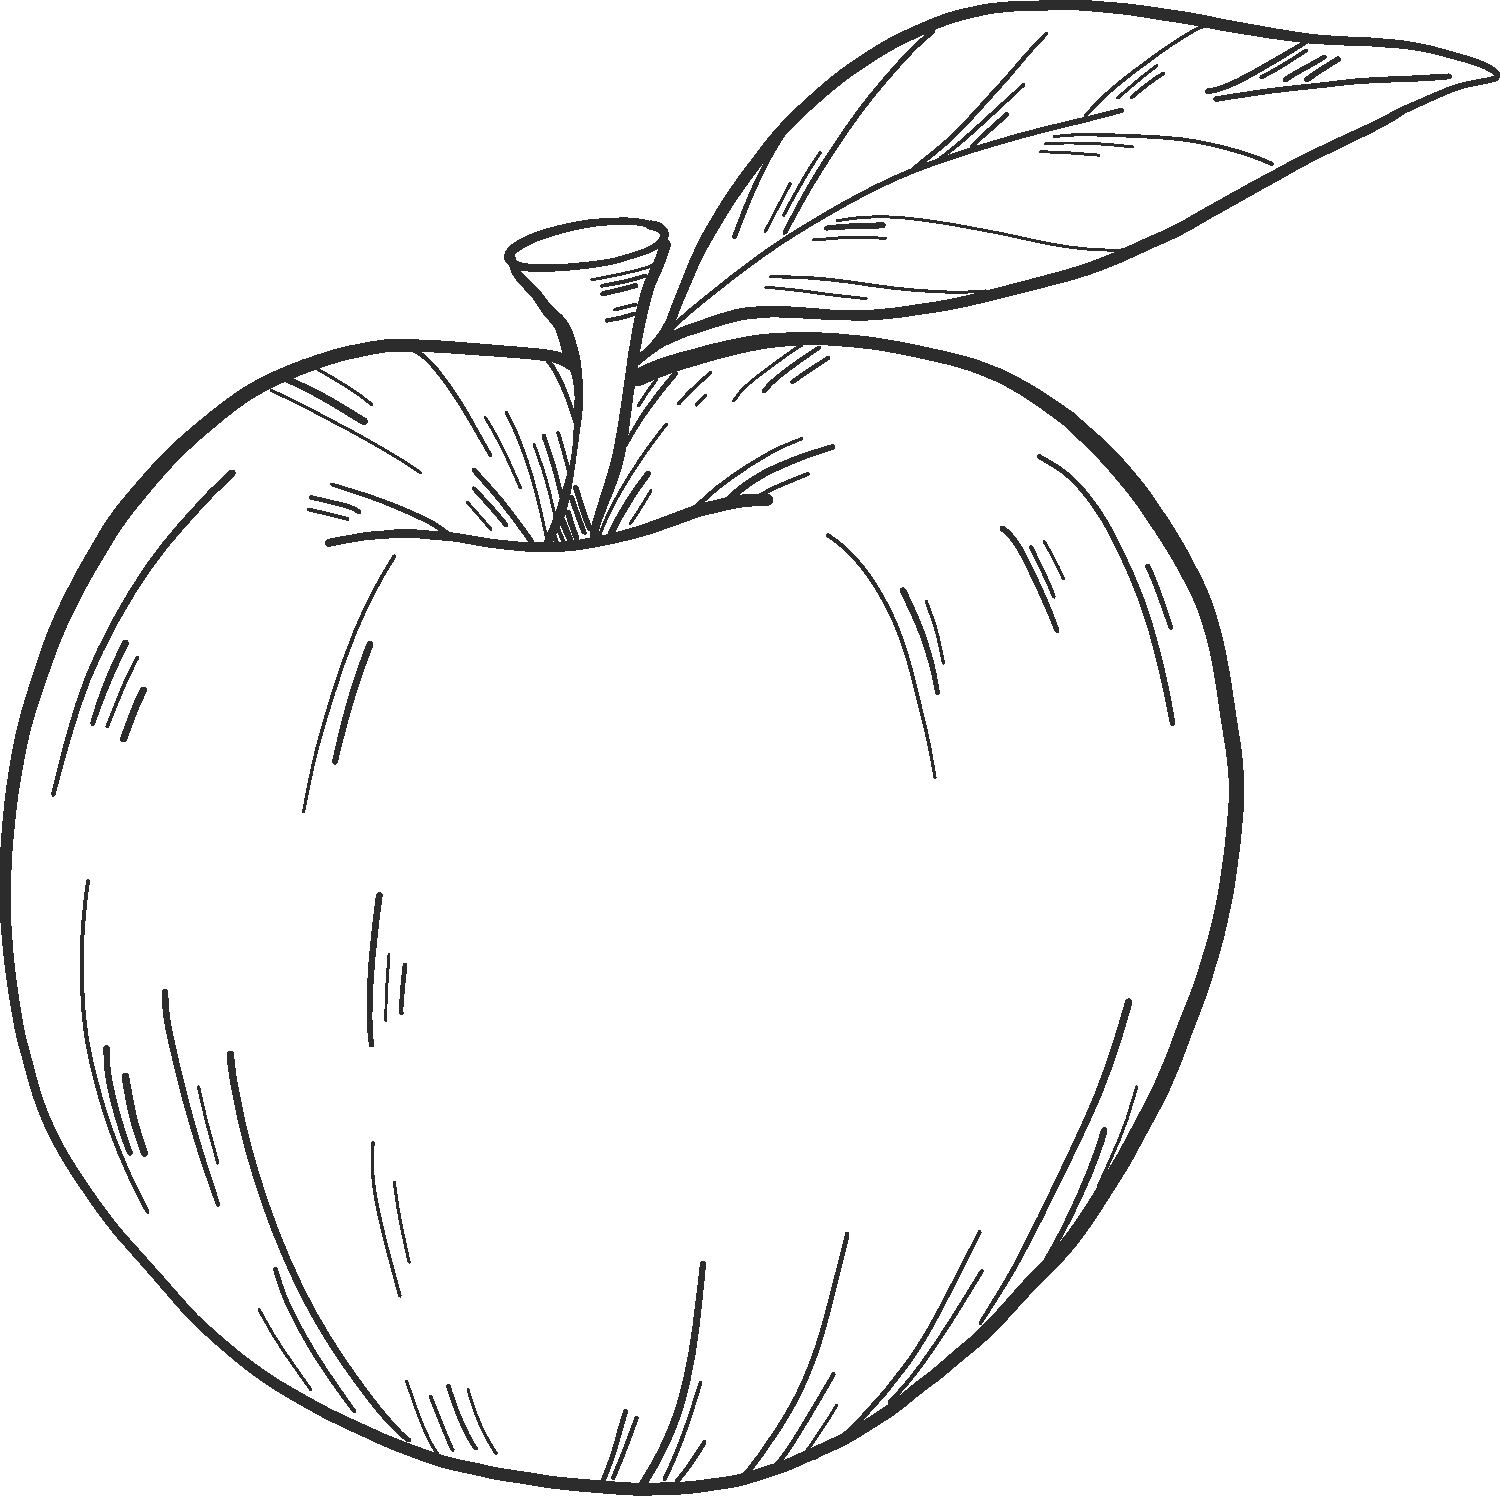 Apple 05  coloring page to print and coloring